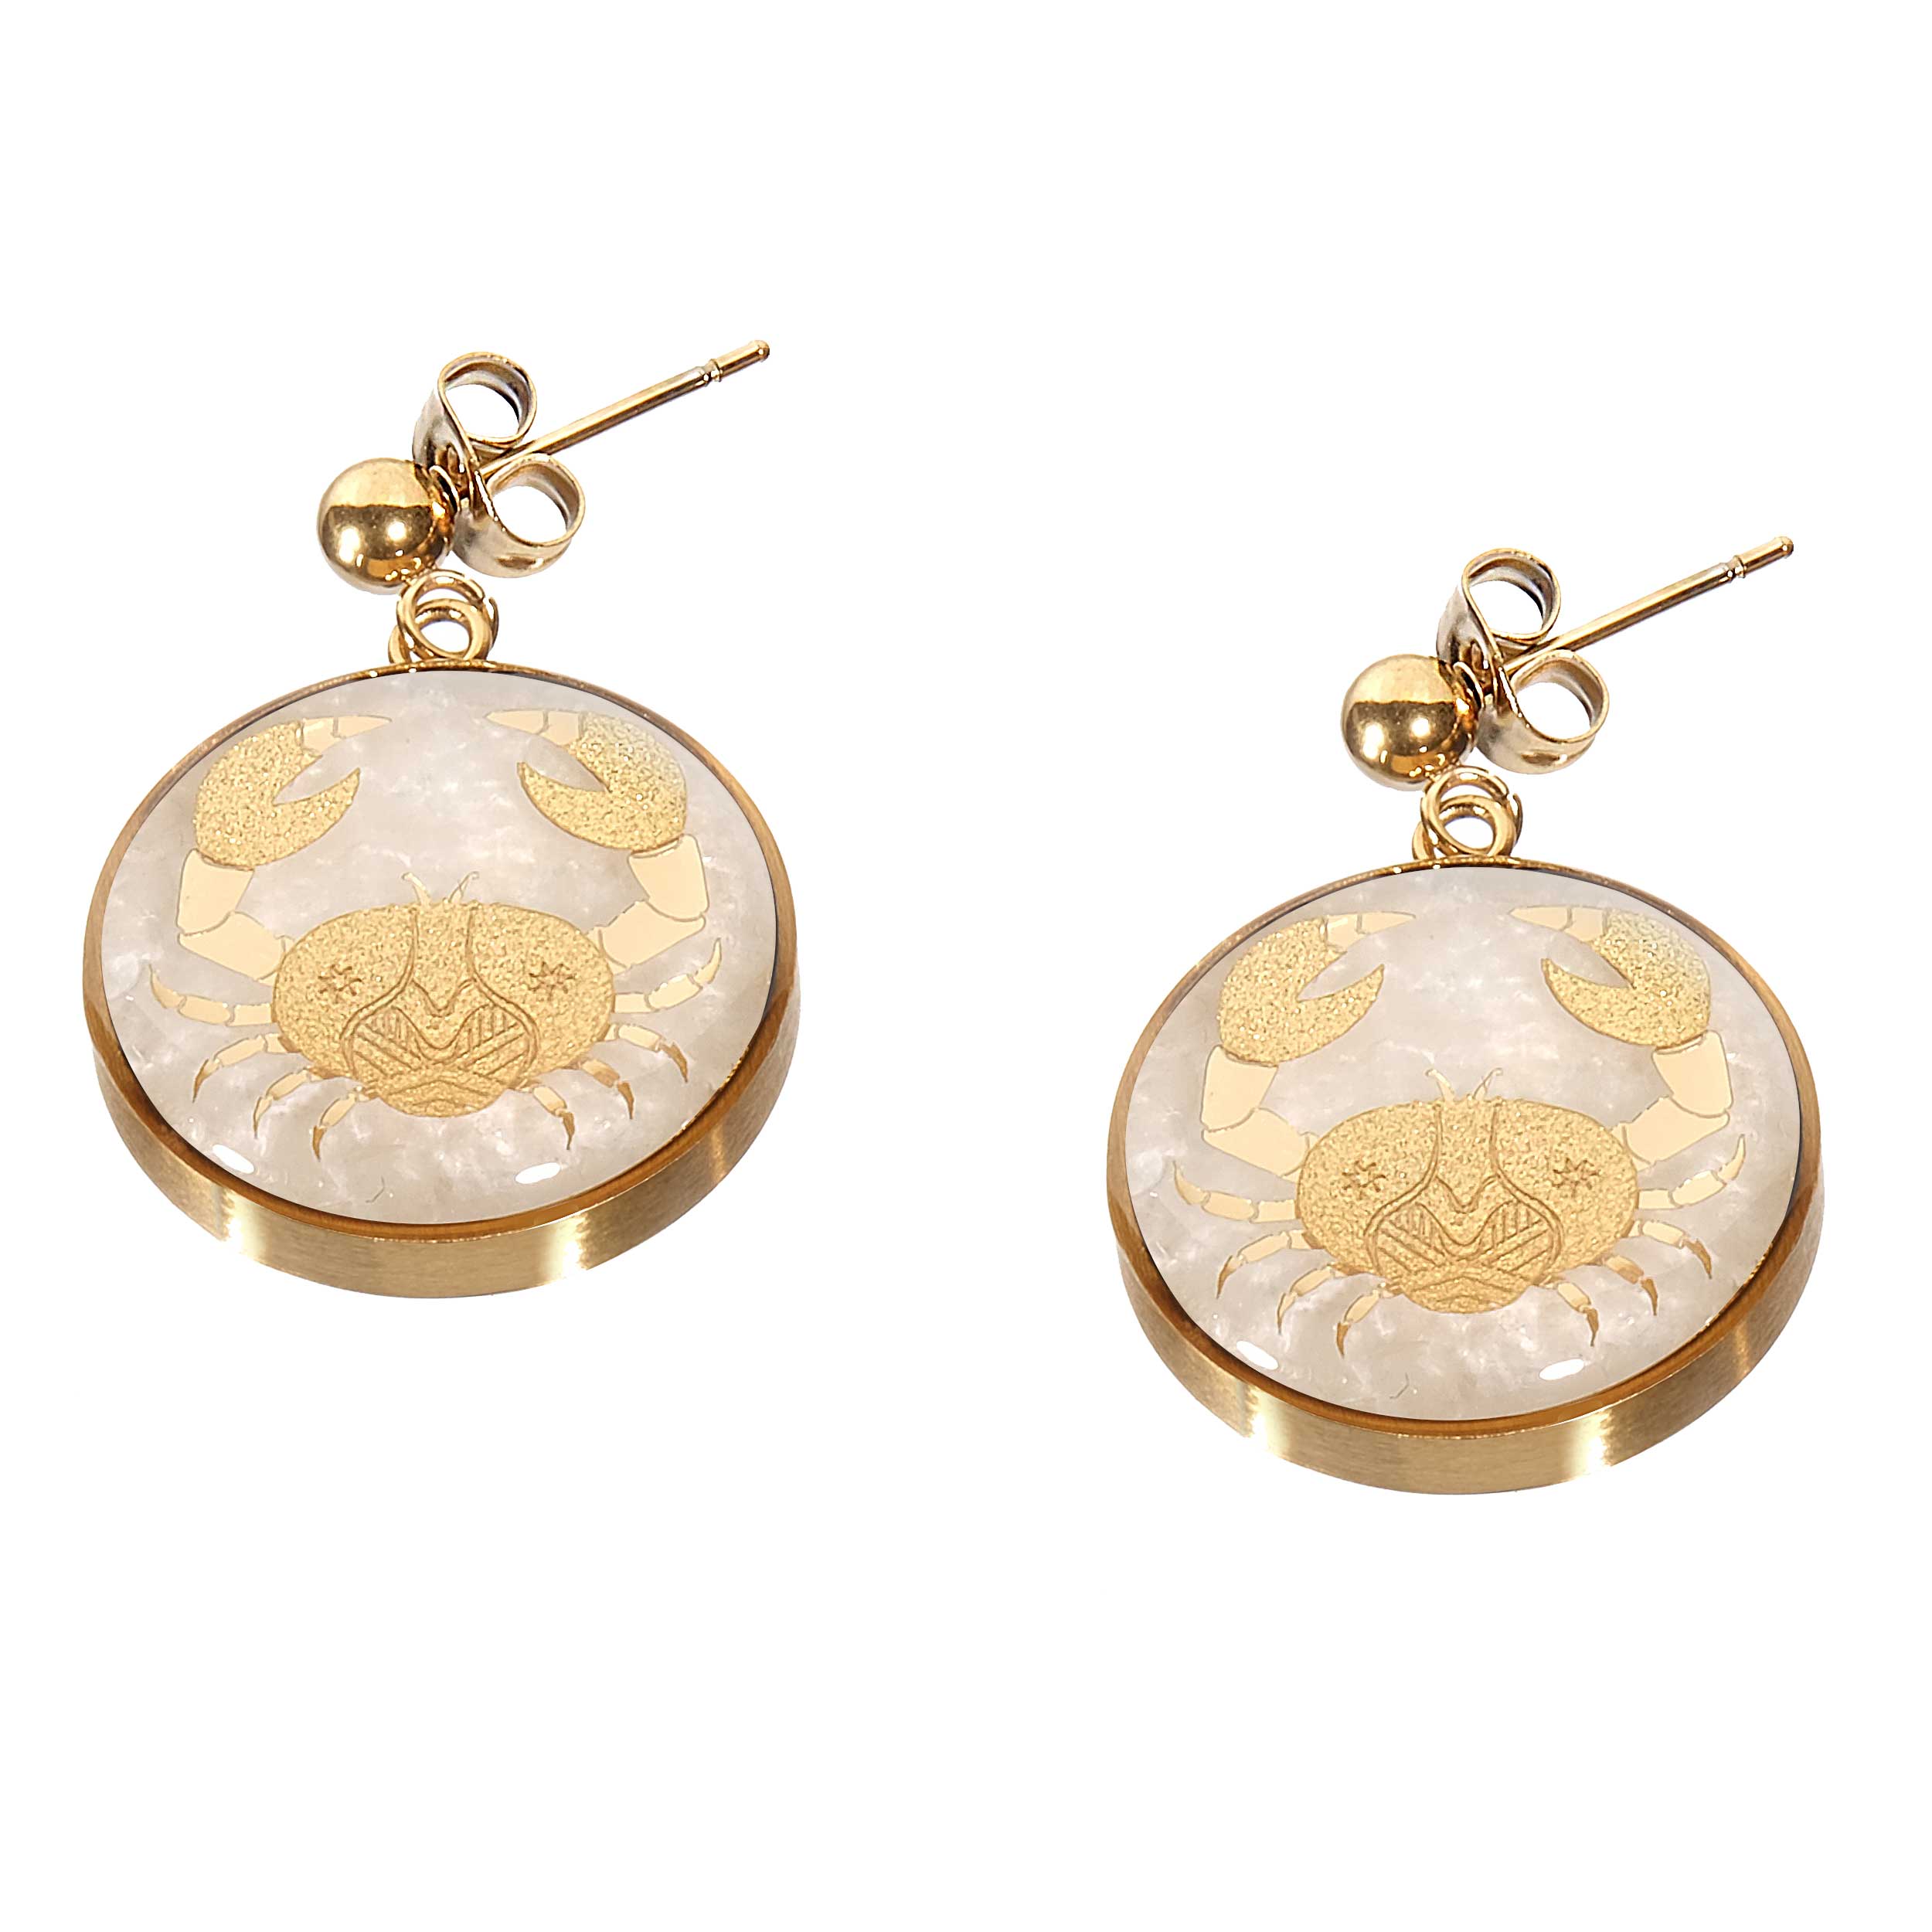 Shell stone earrings and 24 carat gold leaf with the symbol design of July